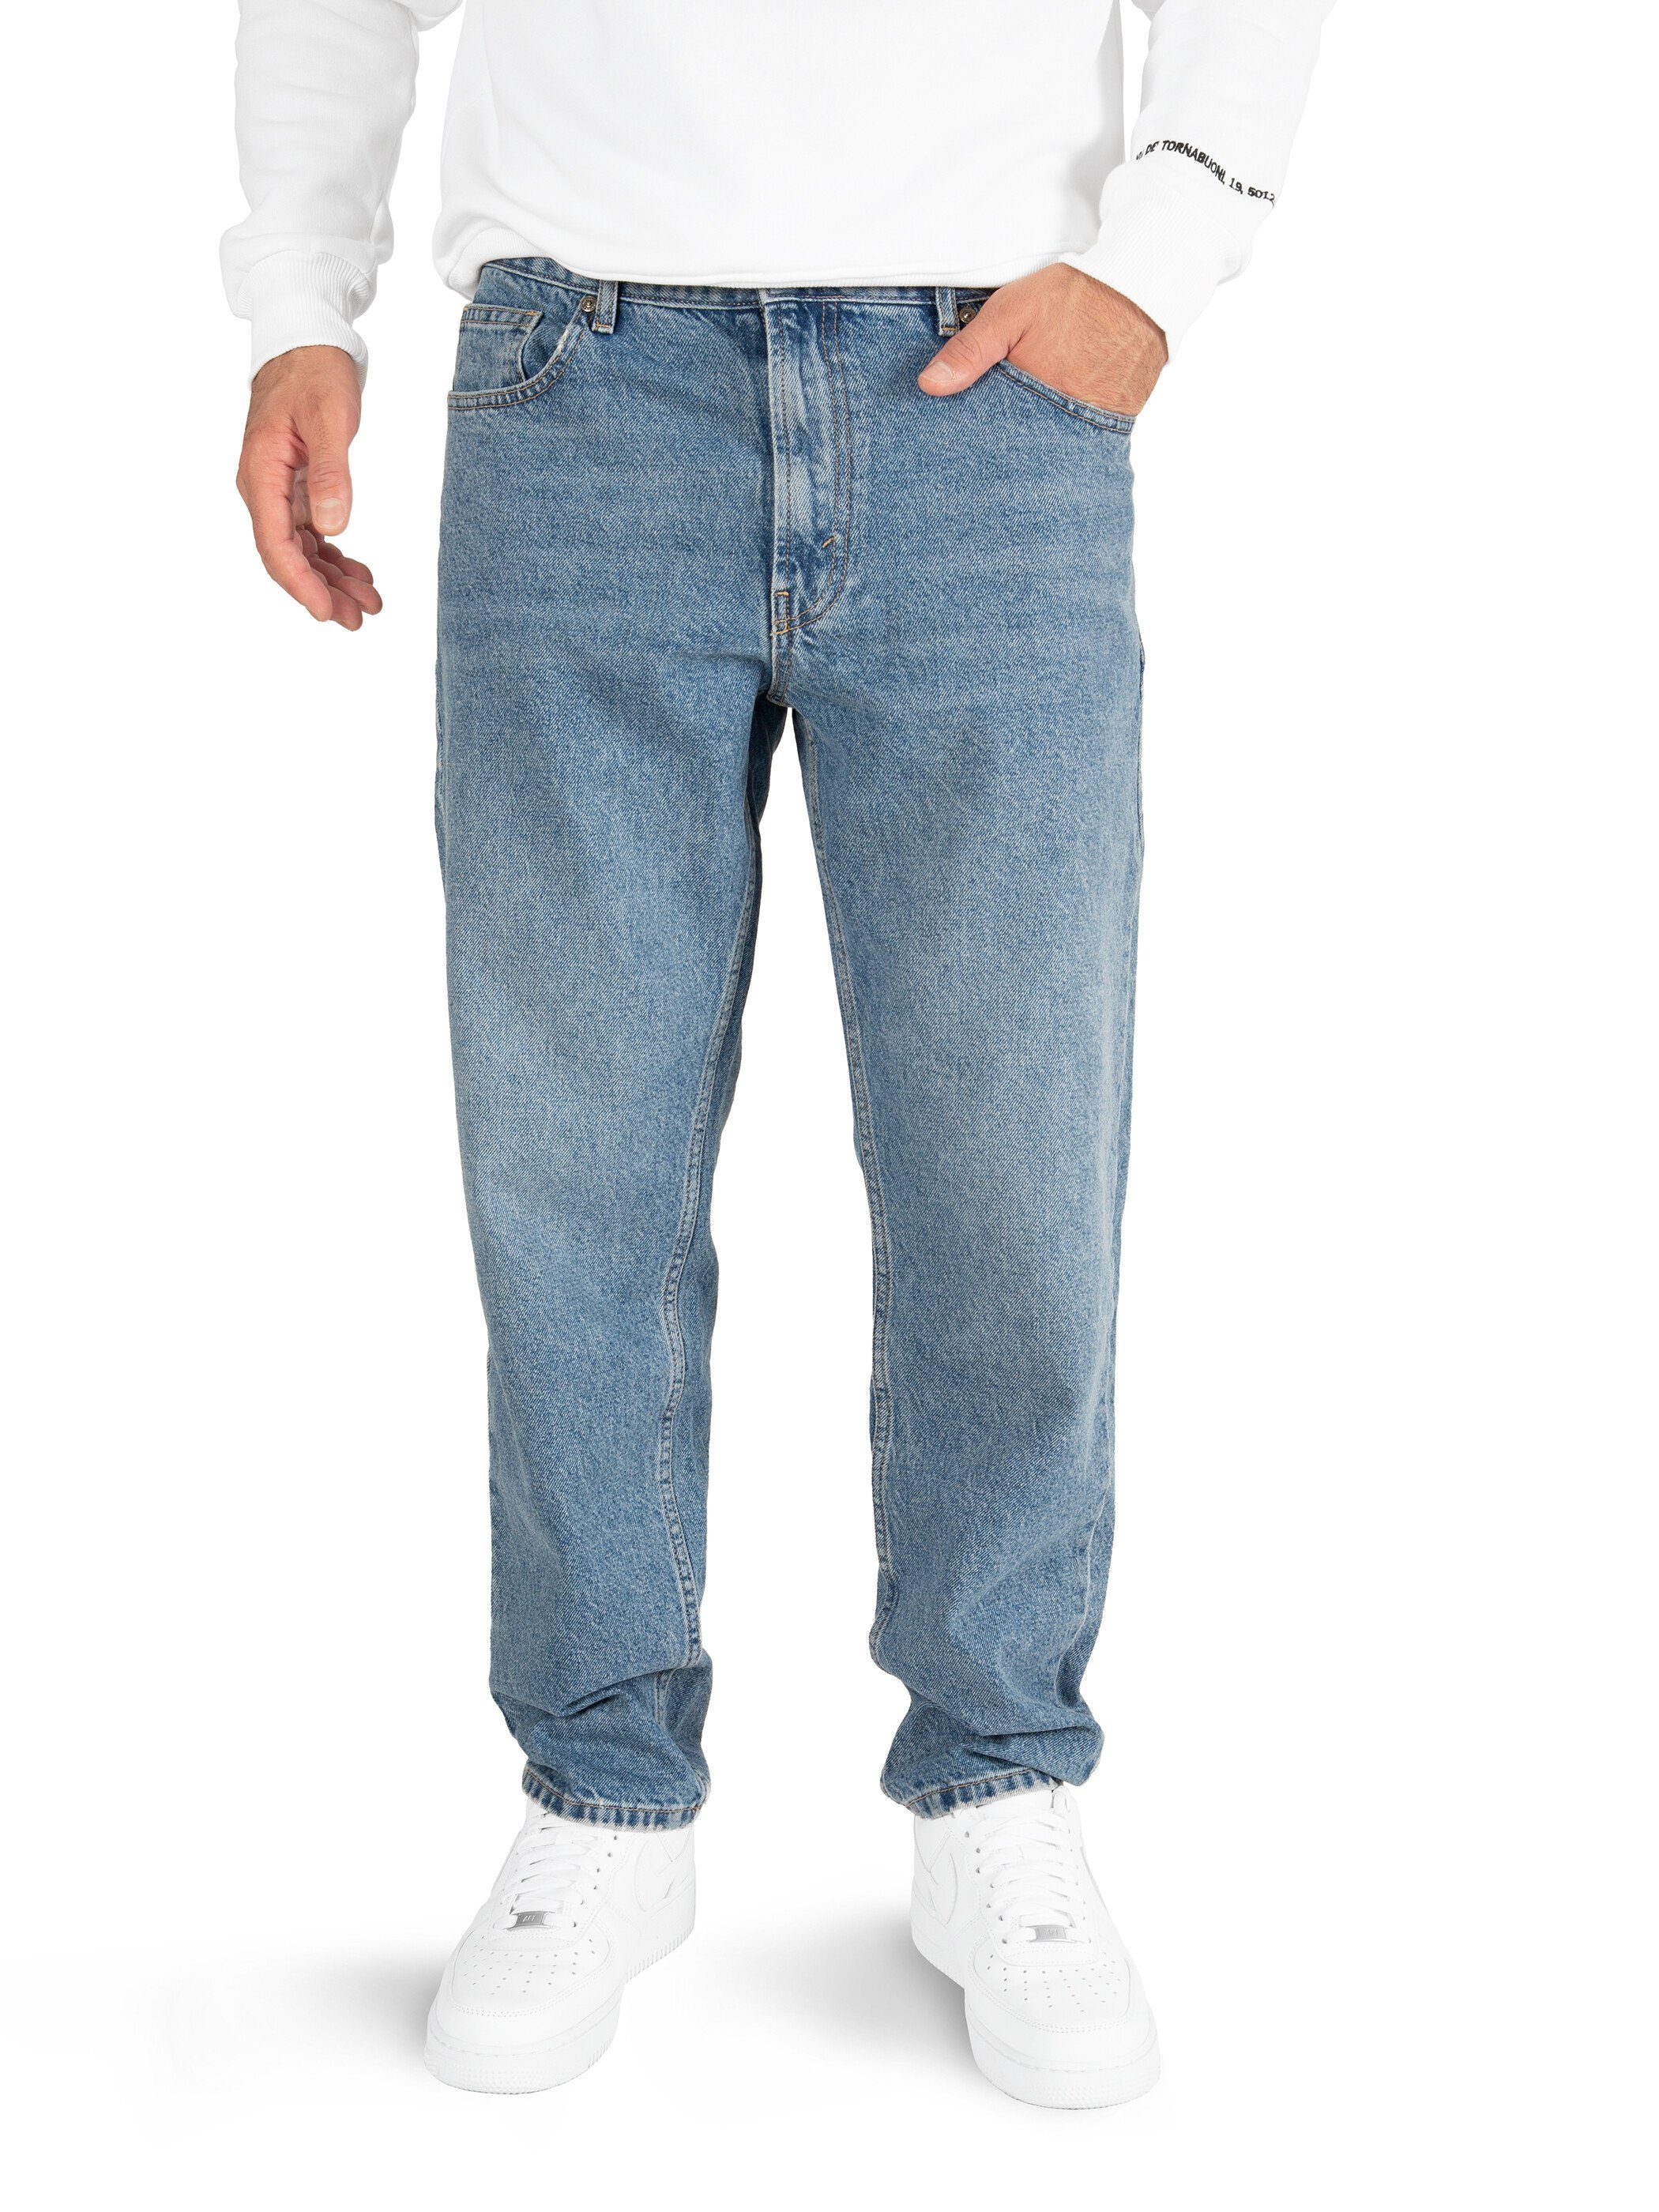 WOTEGA Loose-fit-Jeans »Thor Herren Jeans« bequeme Baumwoll Jeans